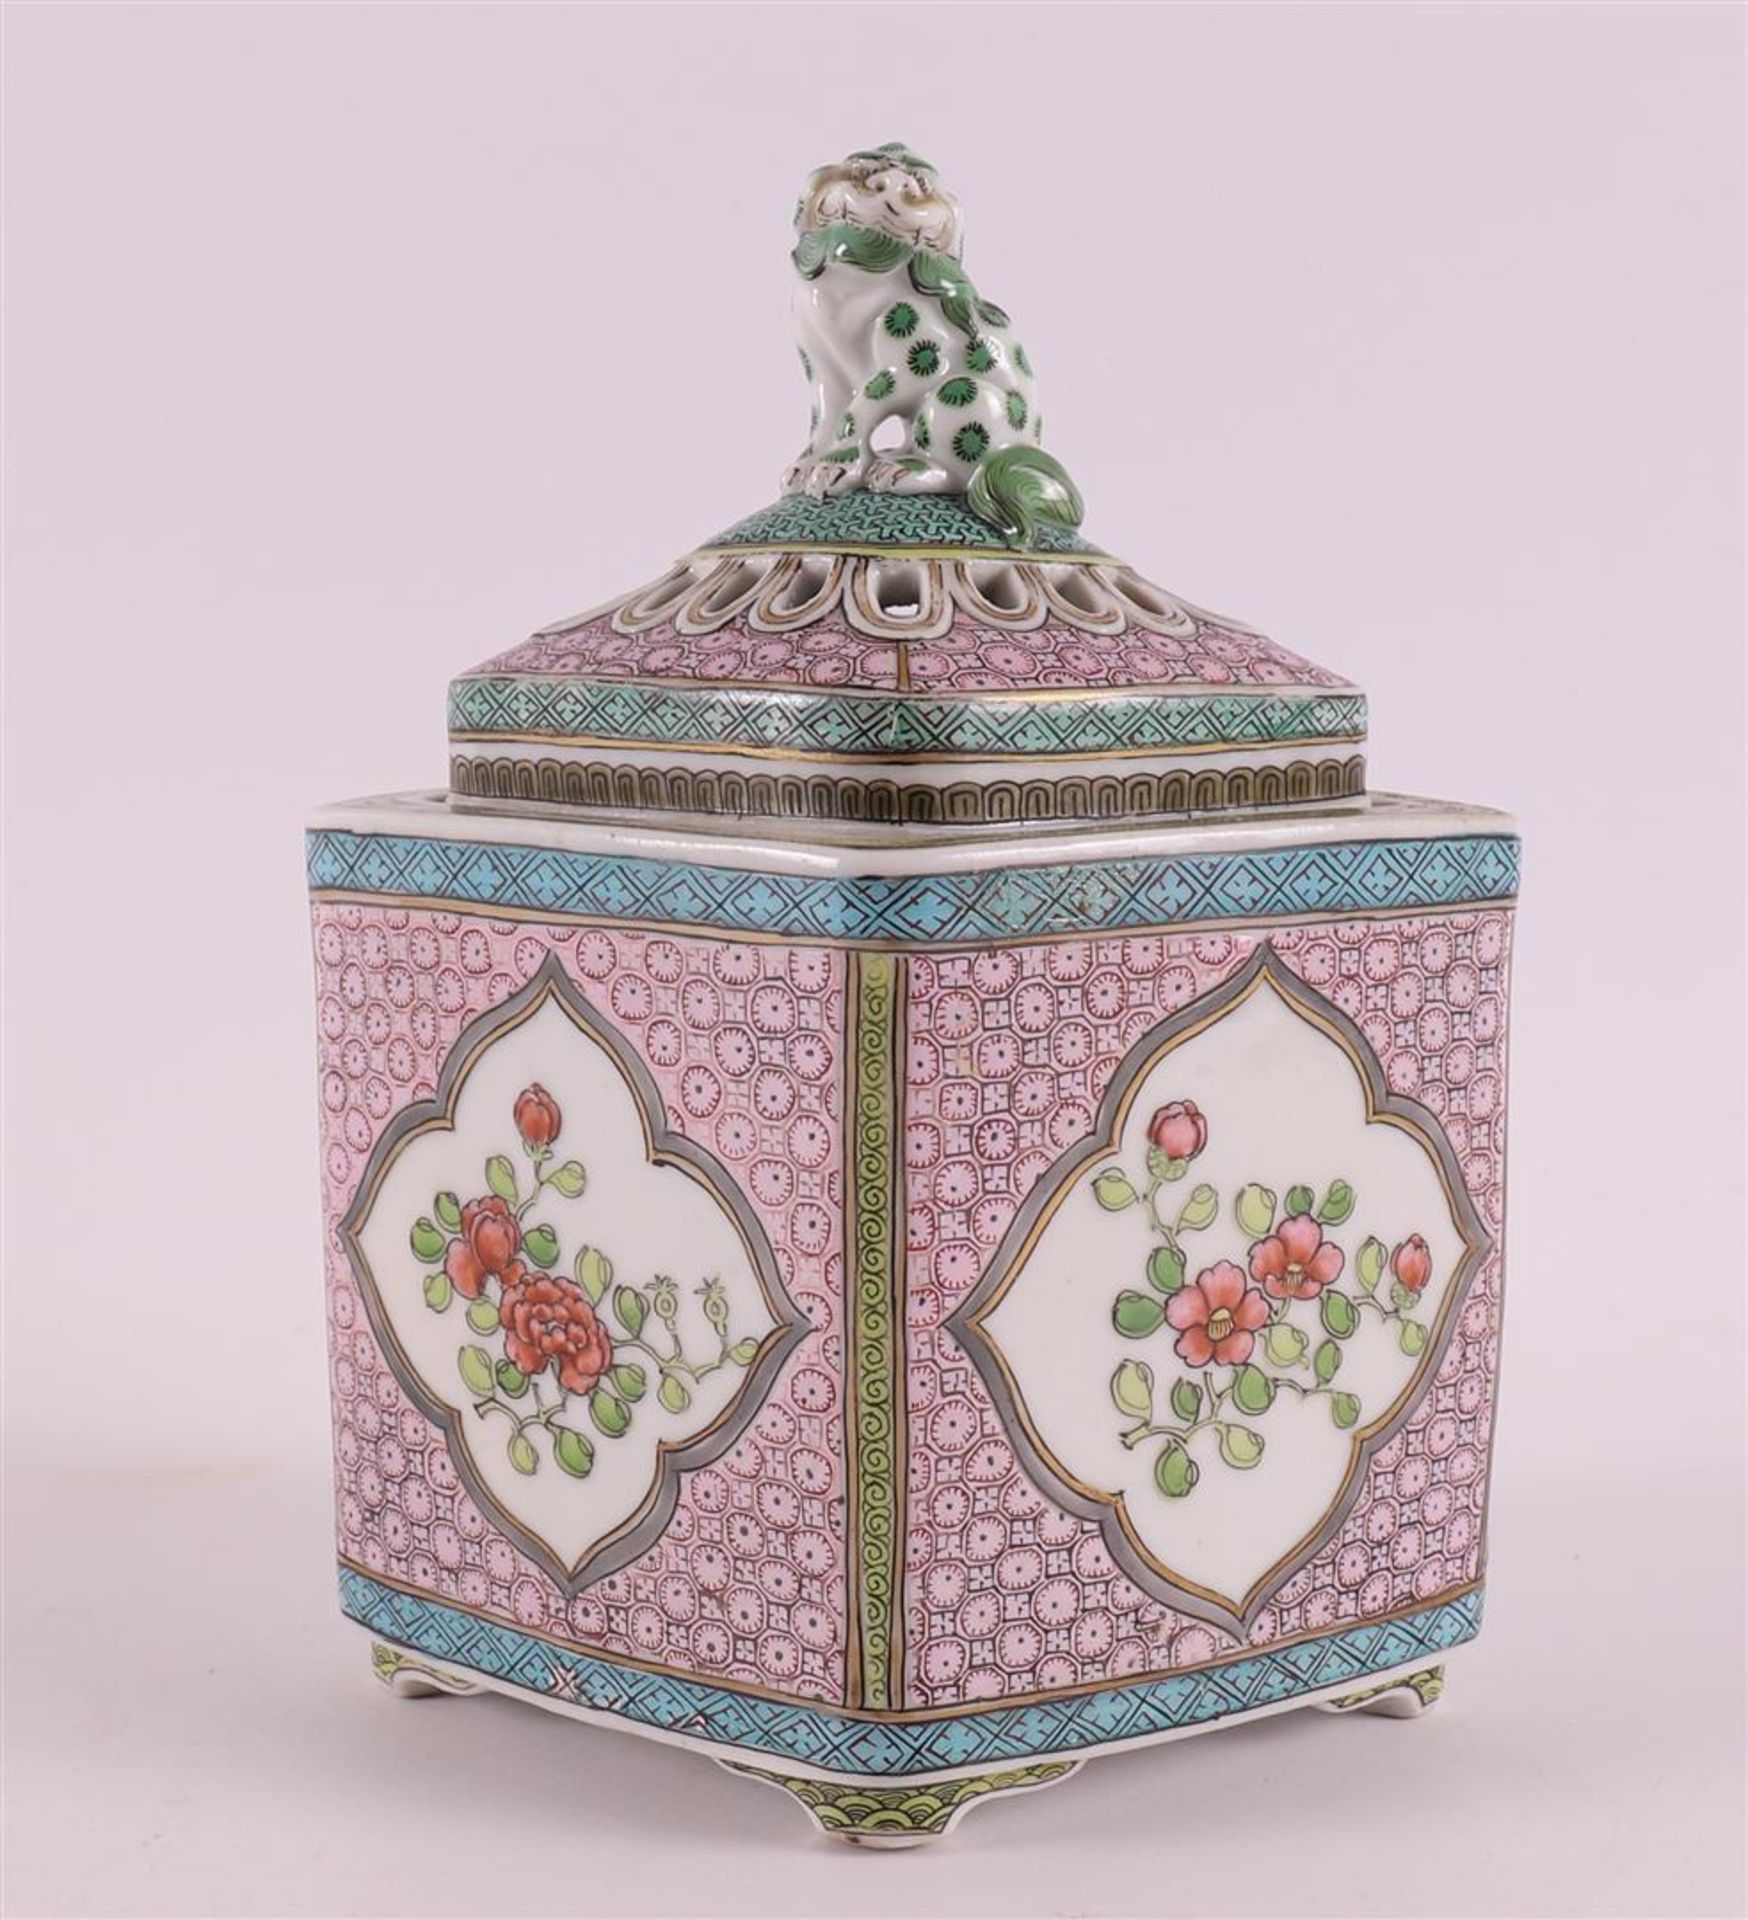 A diamond-shaped porcelain famille rose incense jar with lid, France, Samson, 19th century. Laced